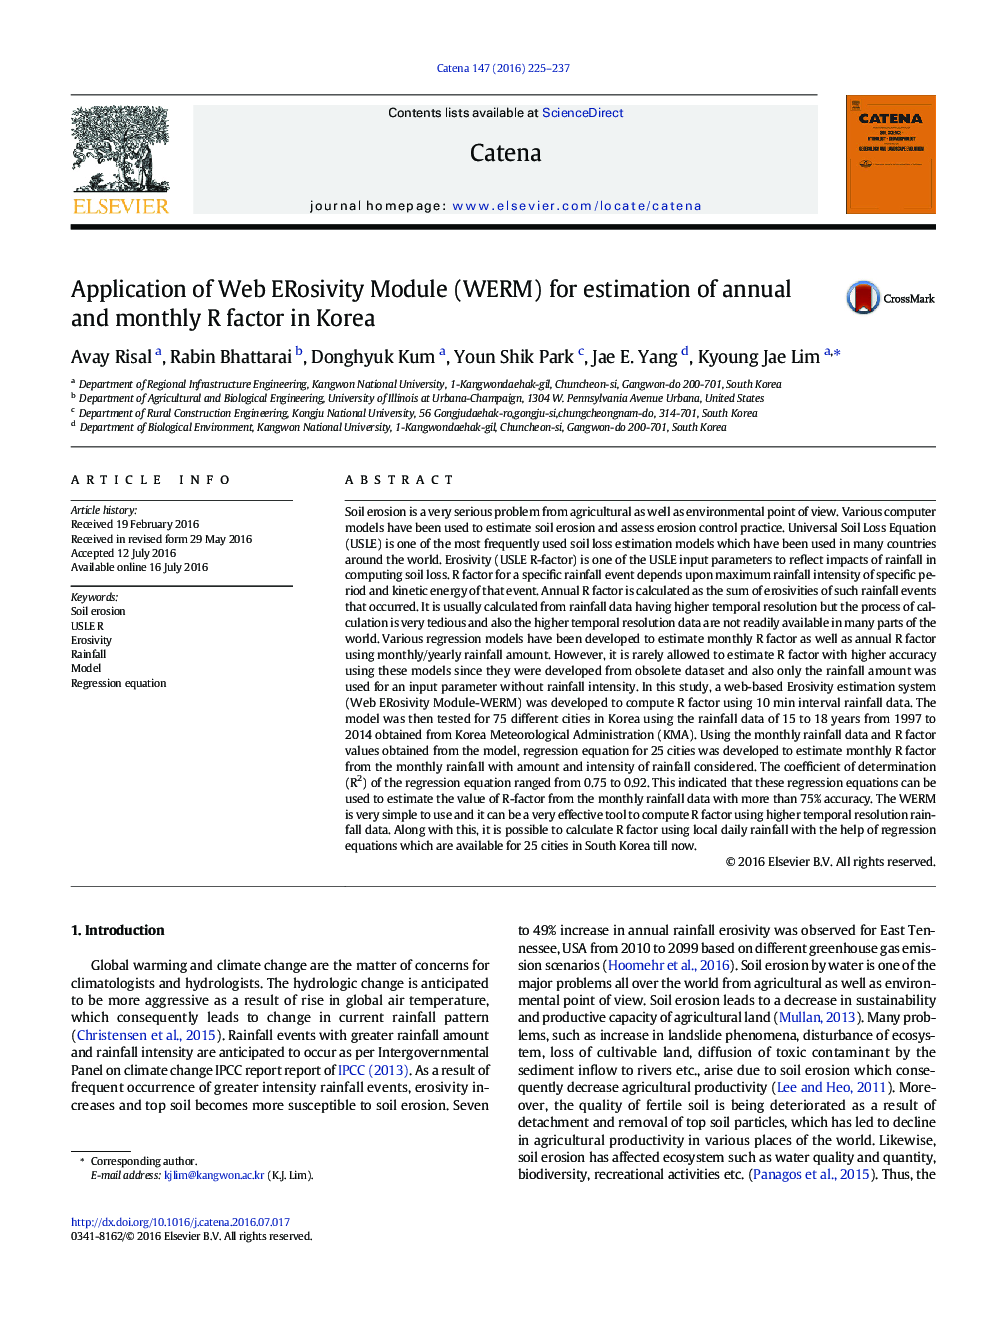 Application of Web ERosivity Module (WERM) for estimation of annual and monthly R factor in Korea